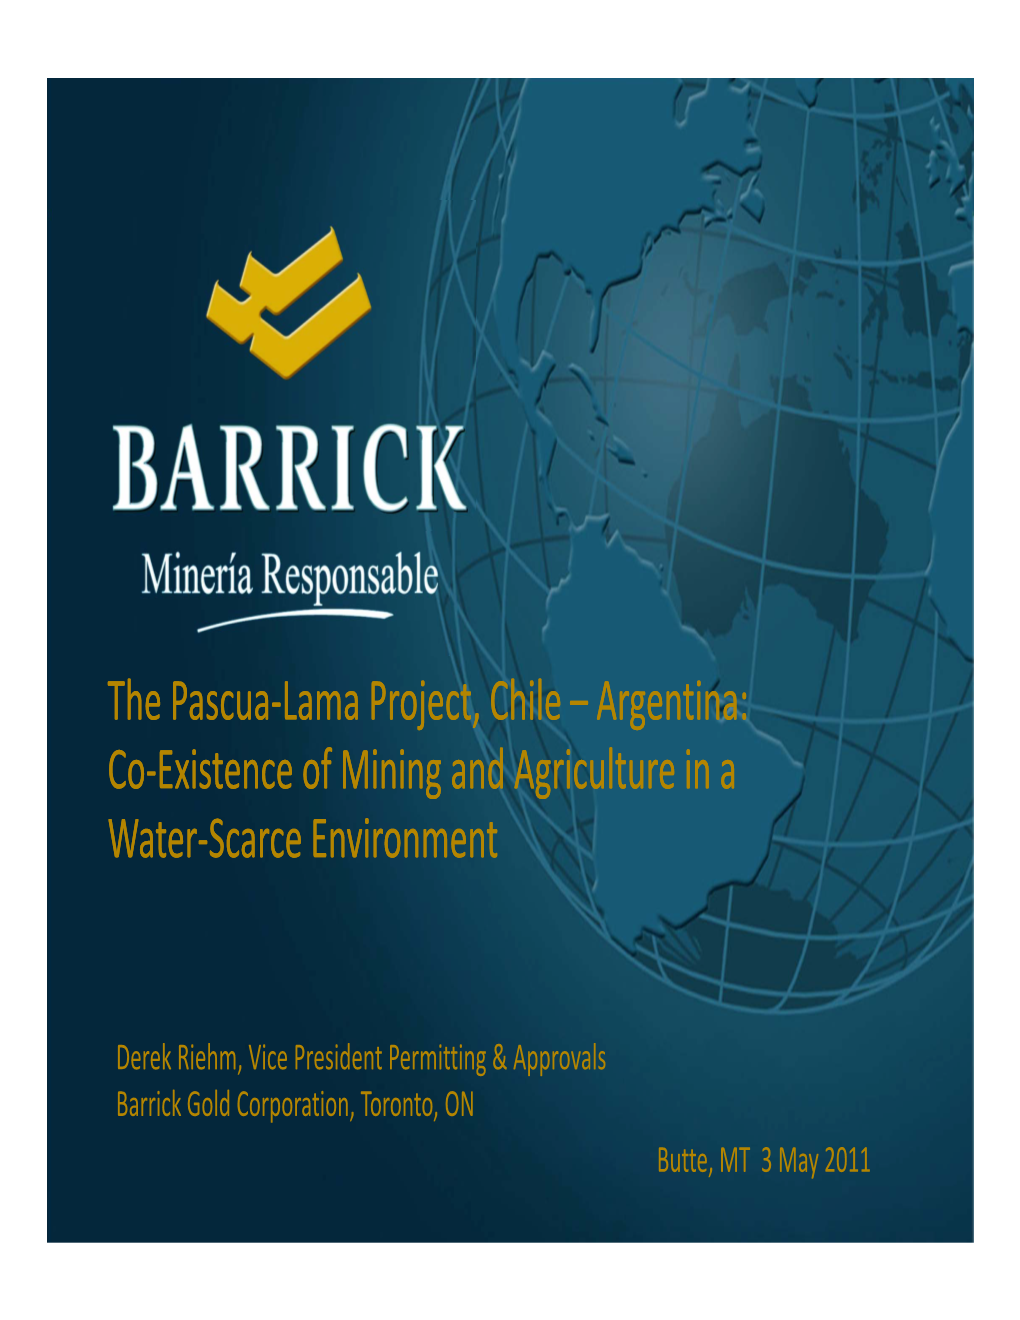 The Pascua-Lama Project, Chile – Argentina: Co-Existence of Mining